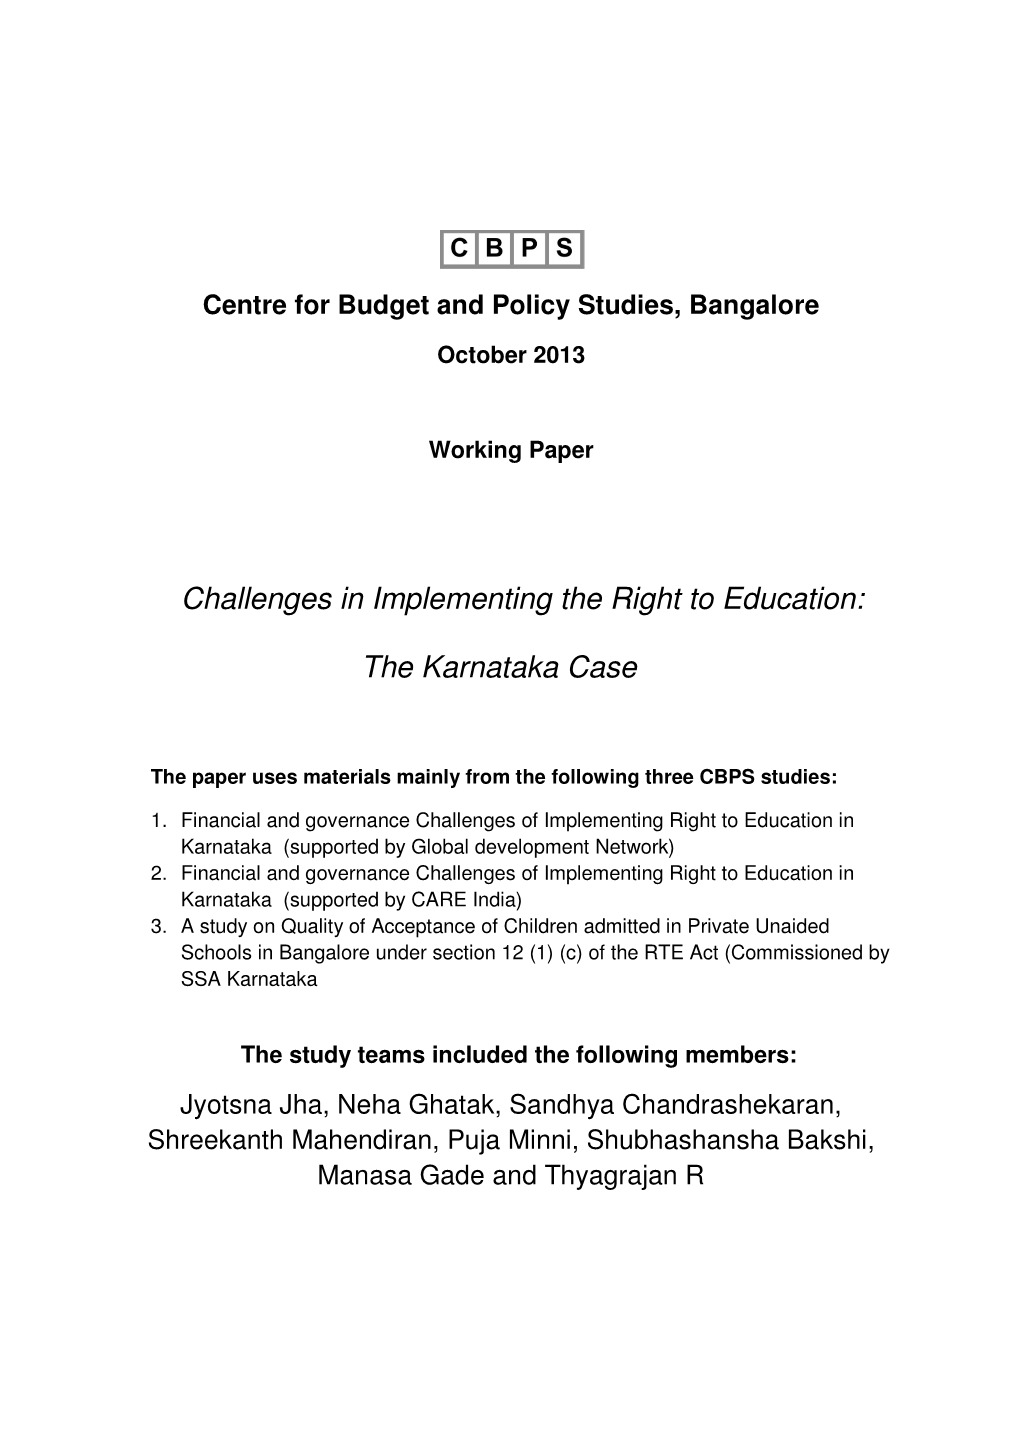 Challenges in Implementing the Right to Education: the Karnataka Case